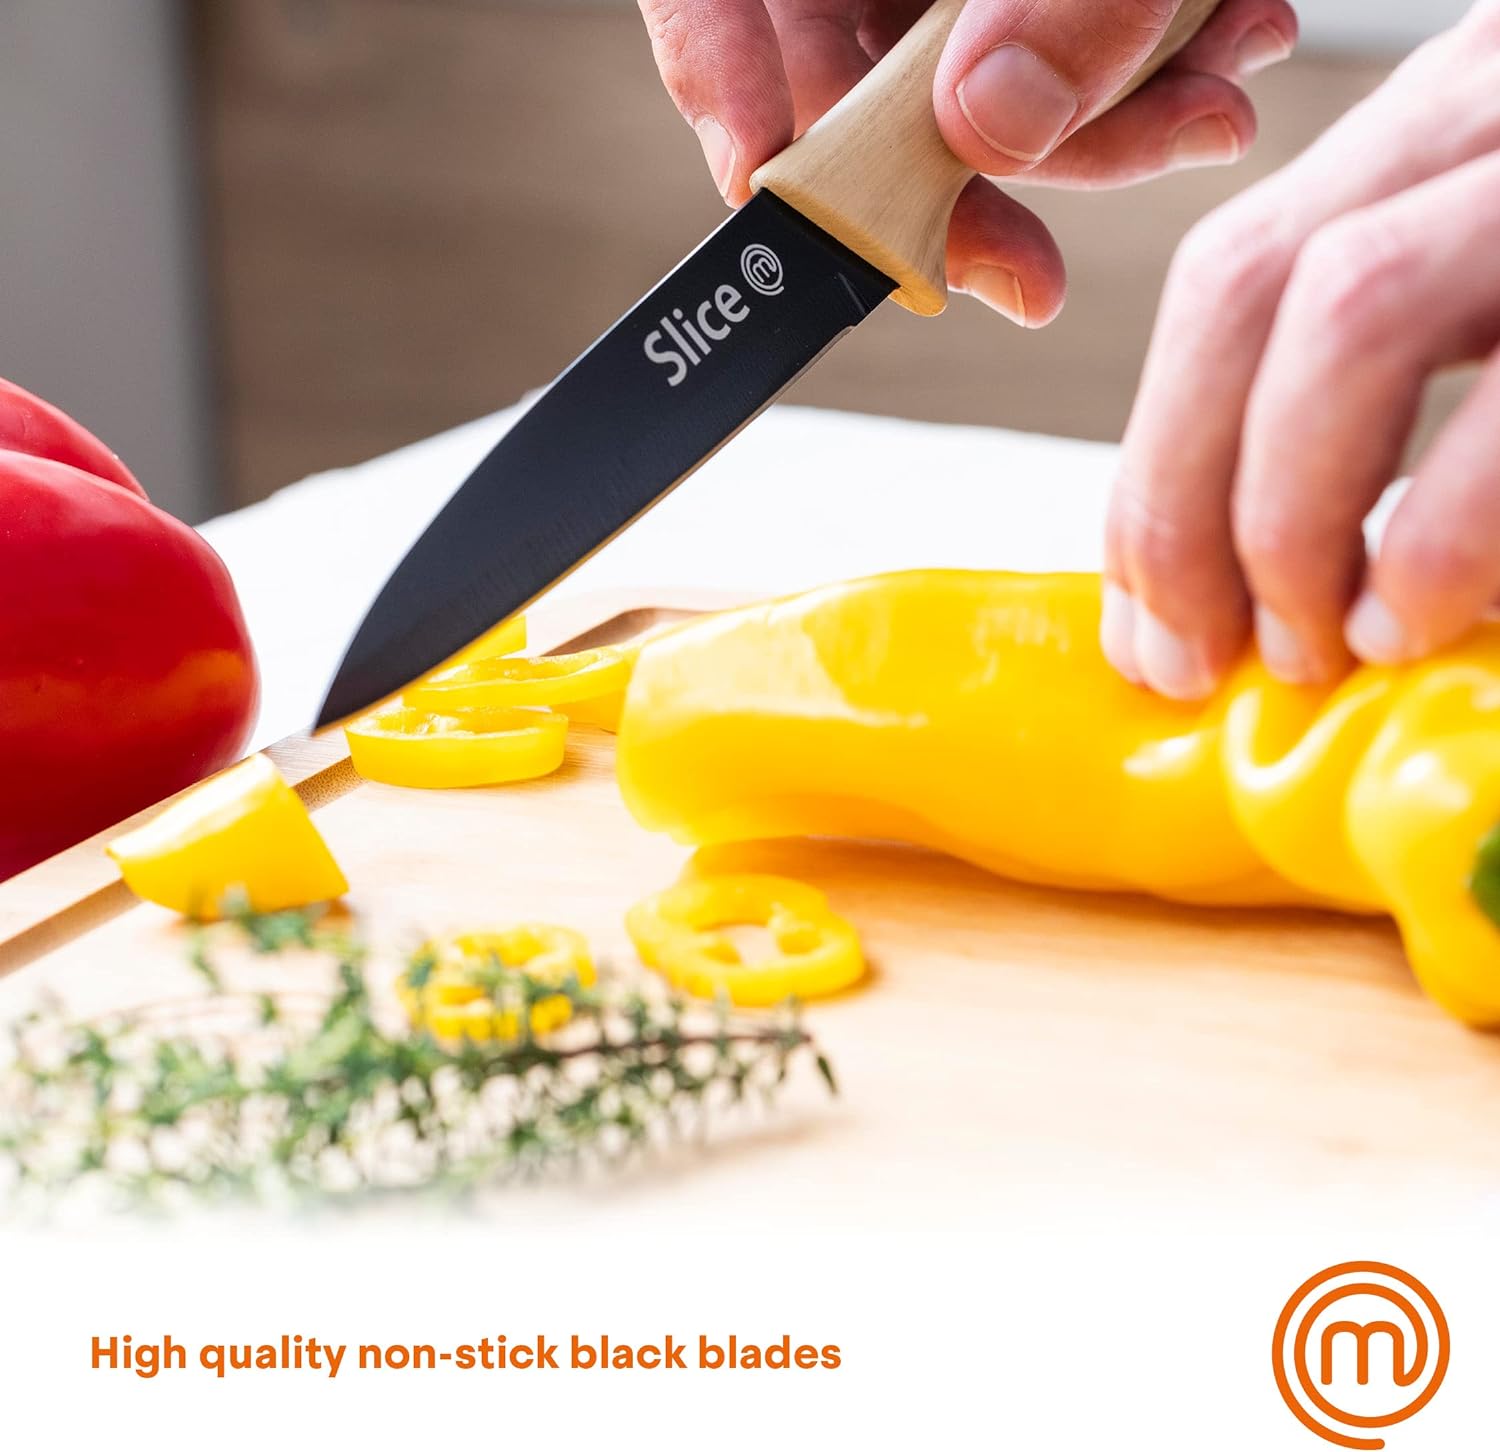 MasterChef Knife Set of 3 Kitchen Knives for Cooking with Non Stick Blades & Soft Touch Handles